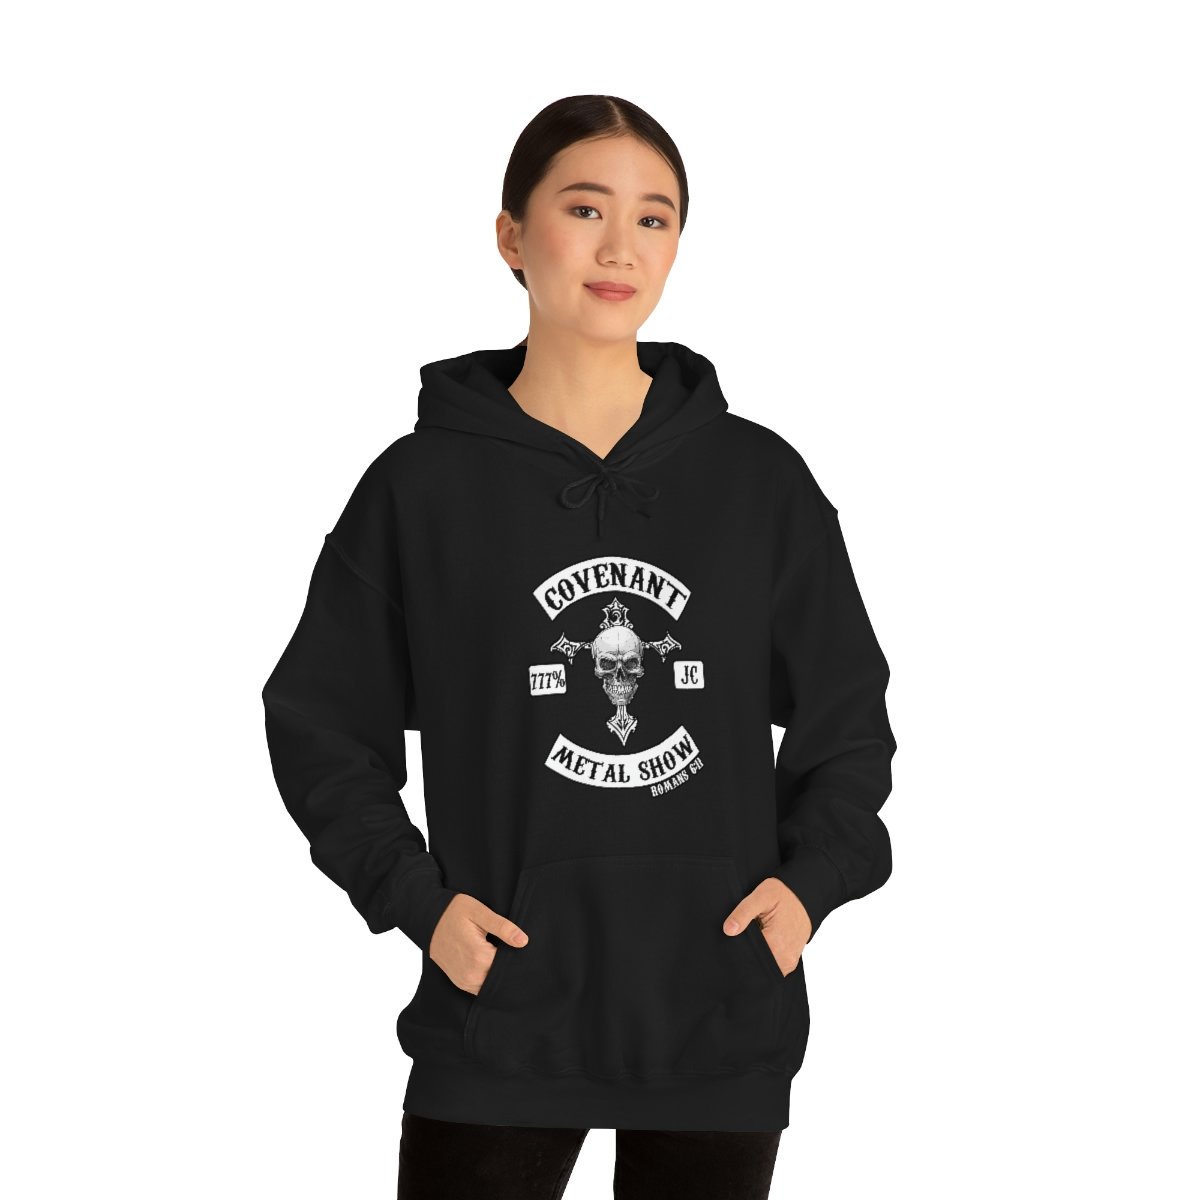 The Covenant Metal Show New Logo Pullover Hooded Sweatshirt